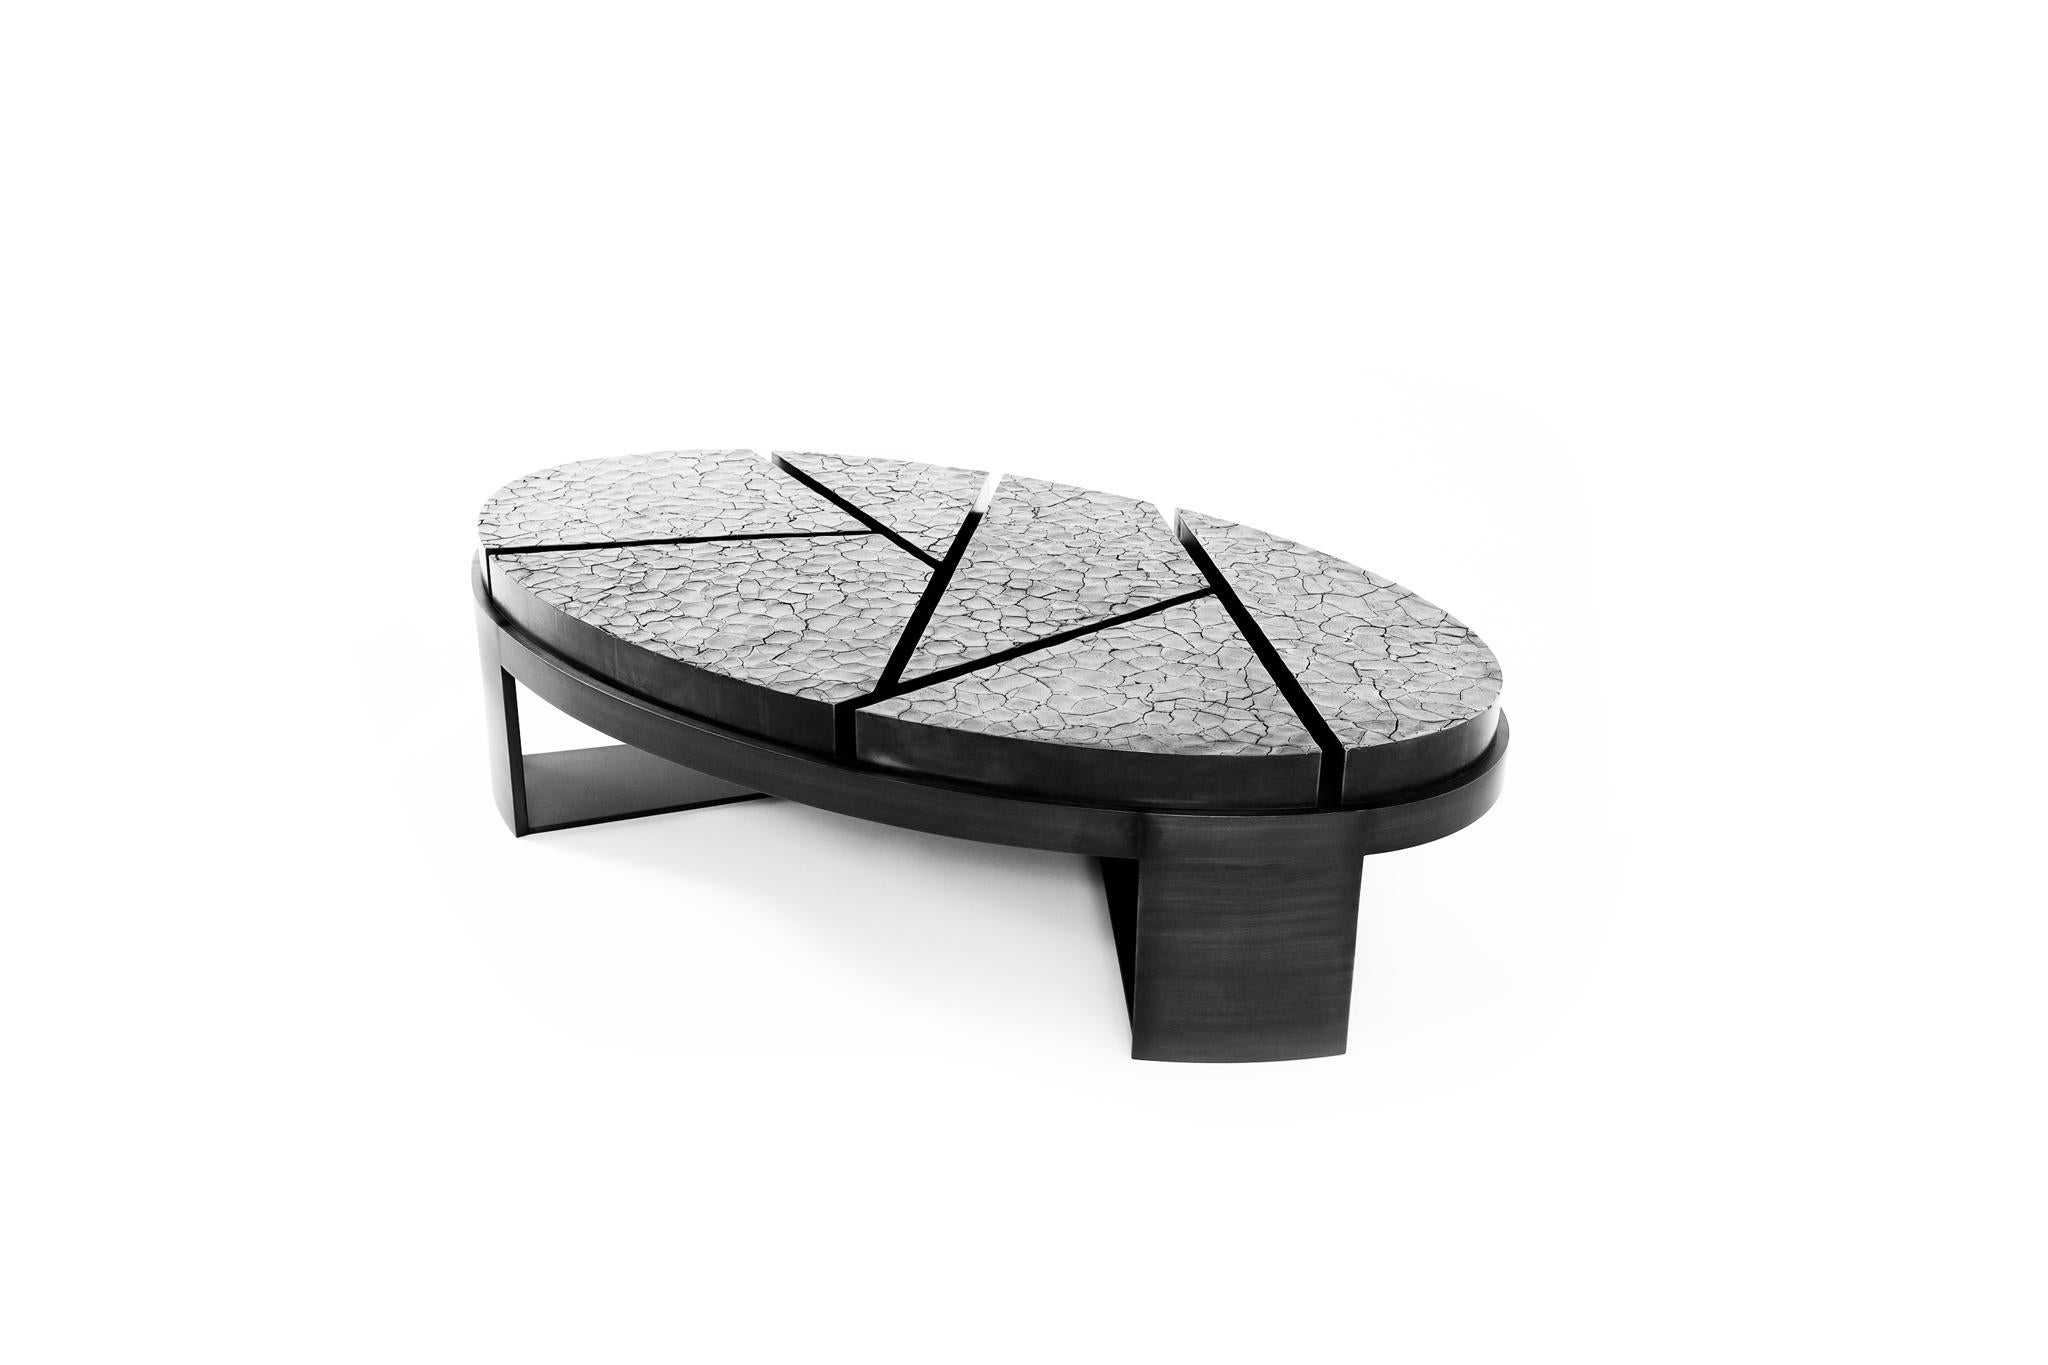 British Aurora Coffee Table - Cracked Earth - Size I For Sale